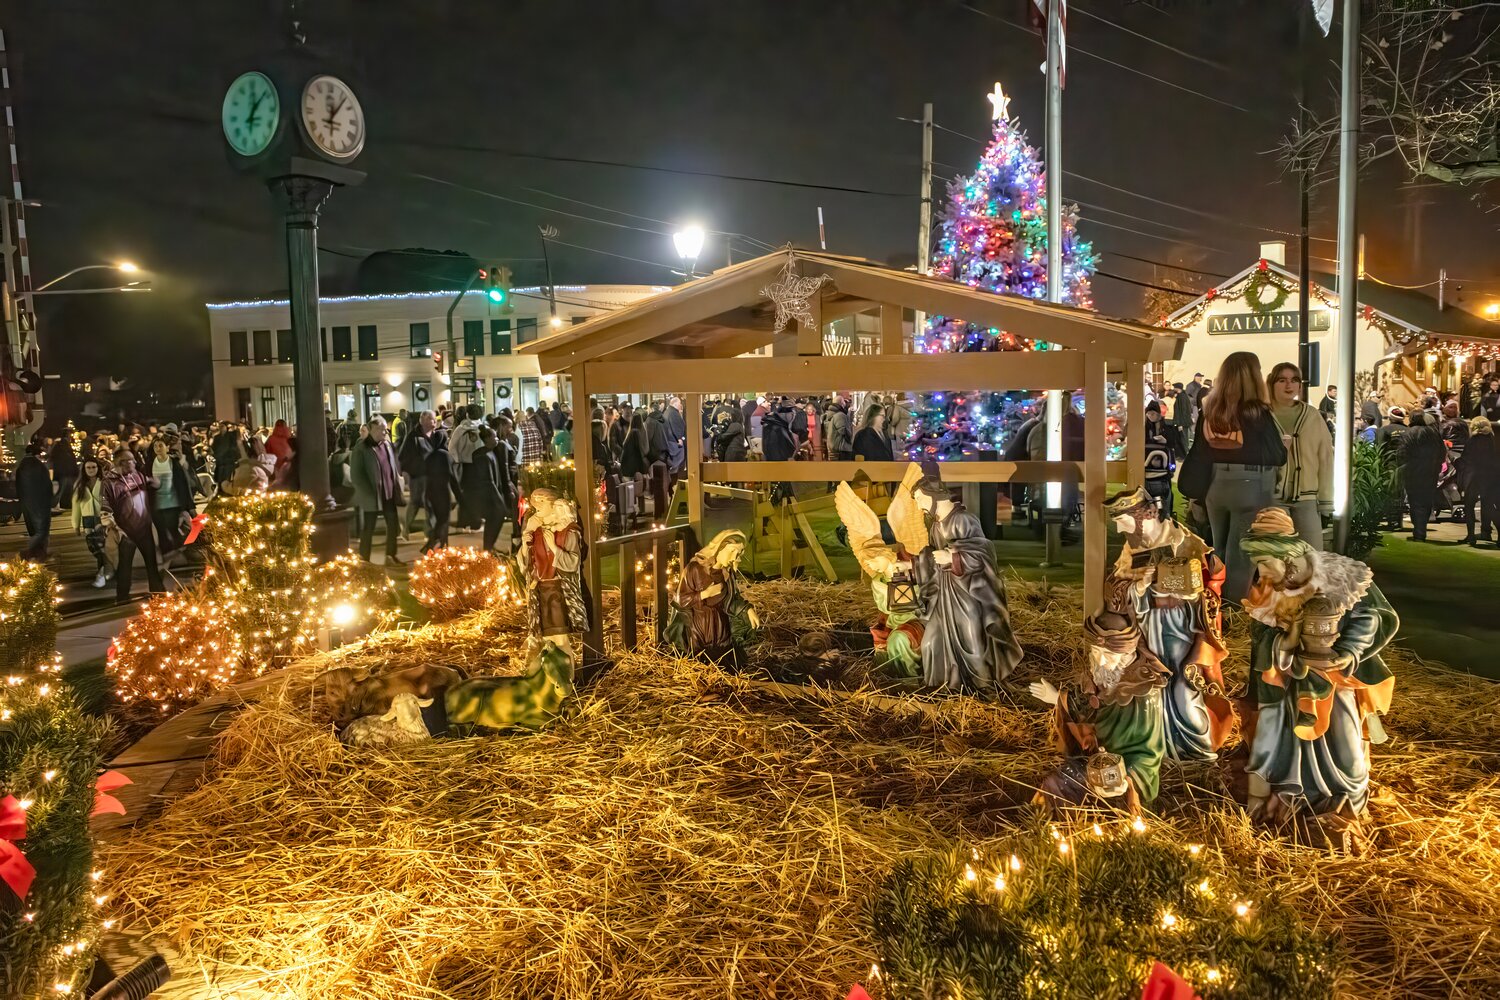 The Nativity scene lit up during Malverne Village’s Blessing of the Créche. The Nativity scene represents the birth of Jesus as represented in the Bible.